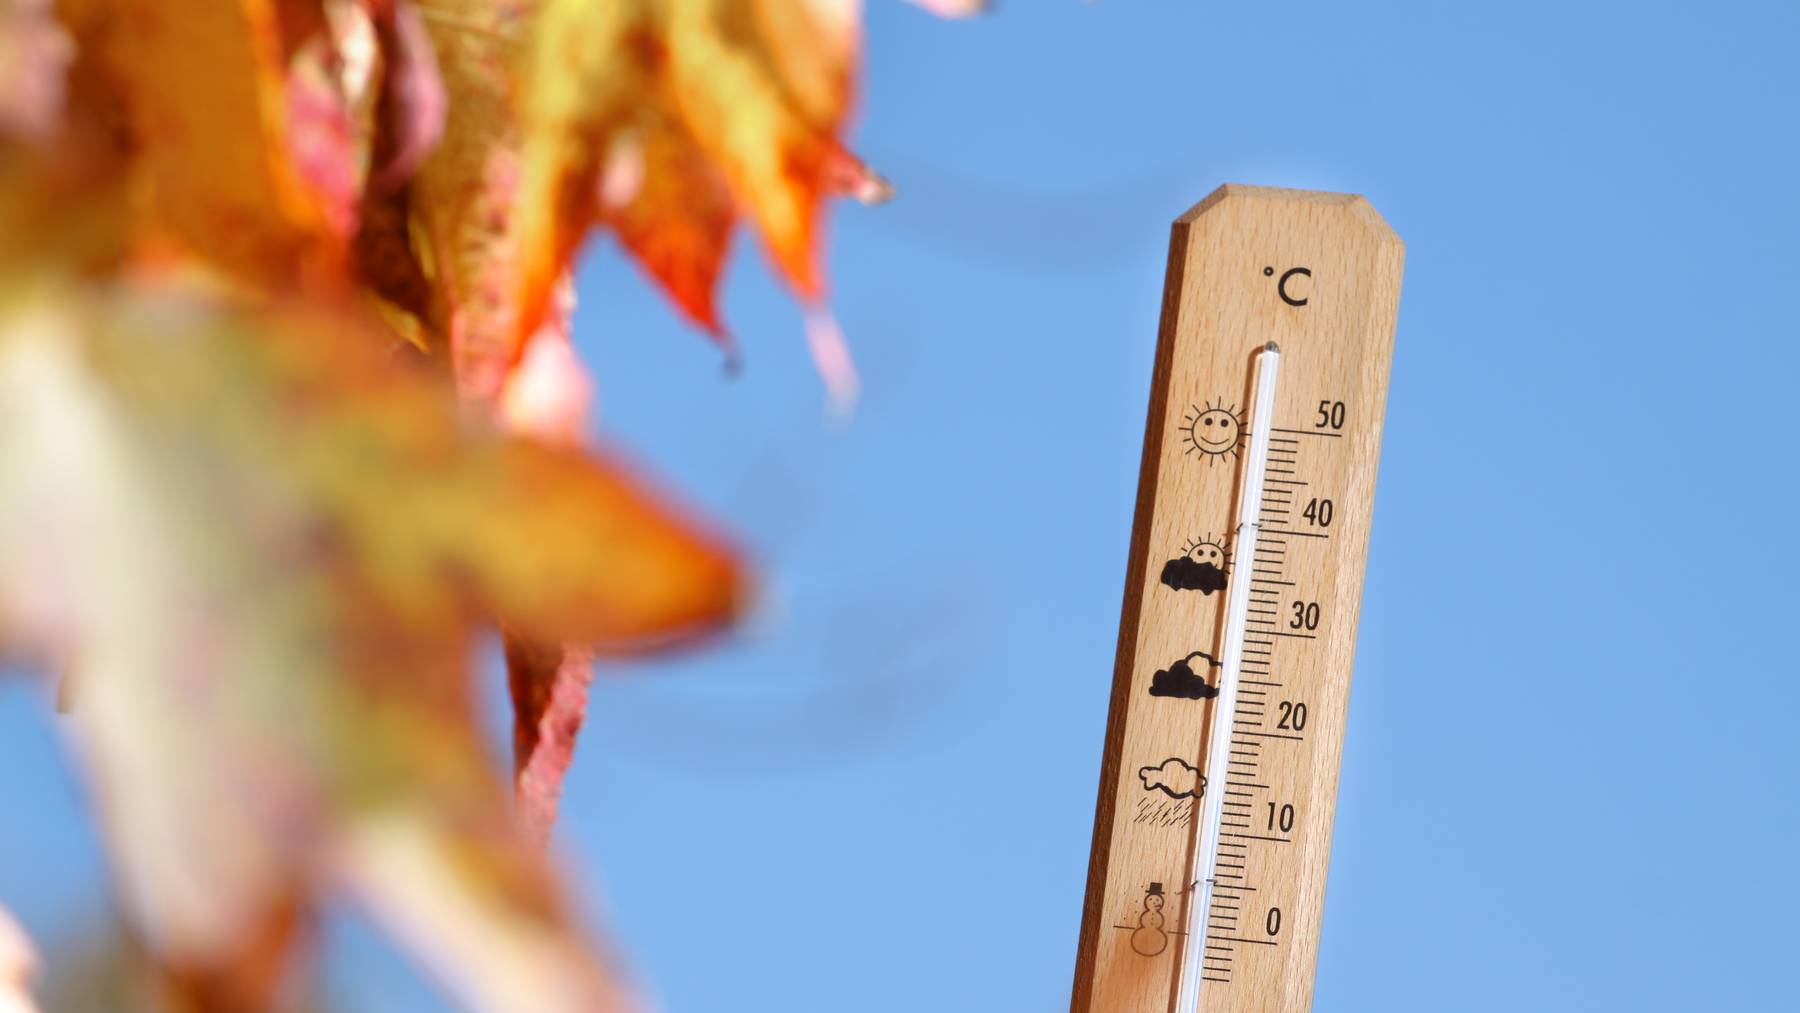 Wetter Herbst Laub Thermometer